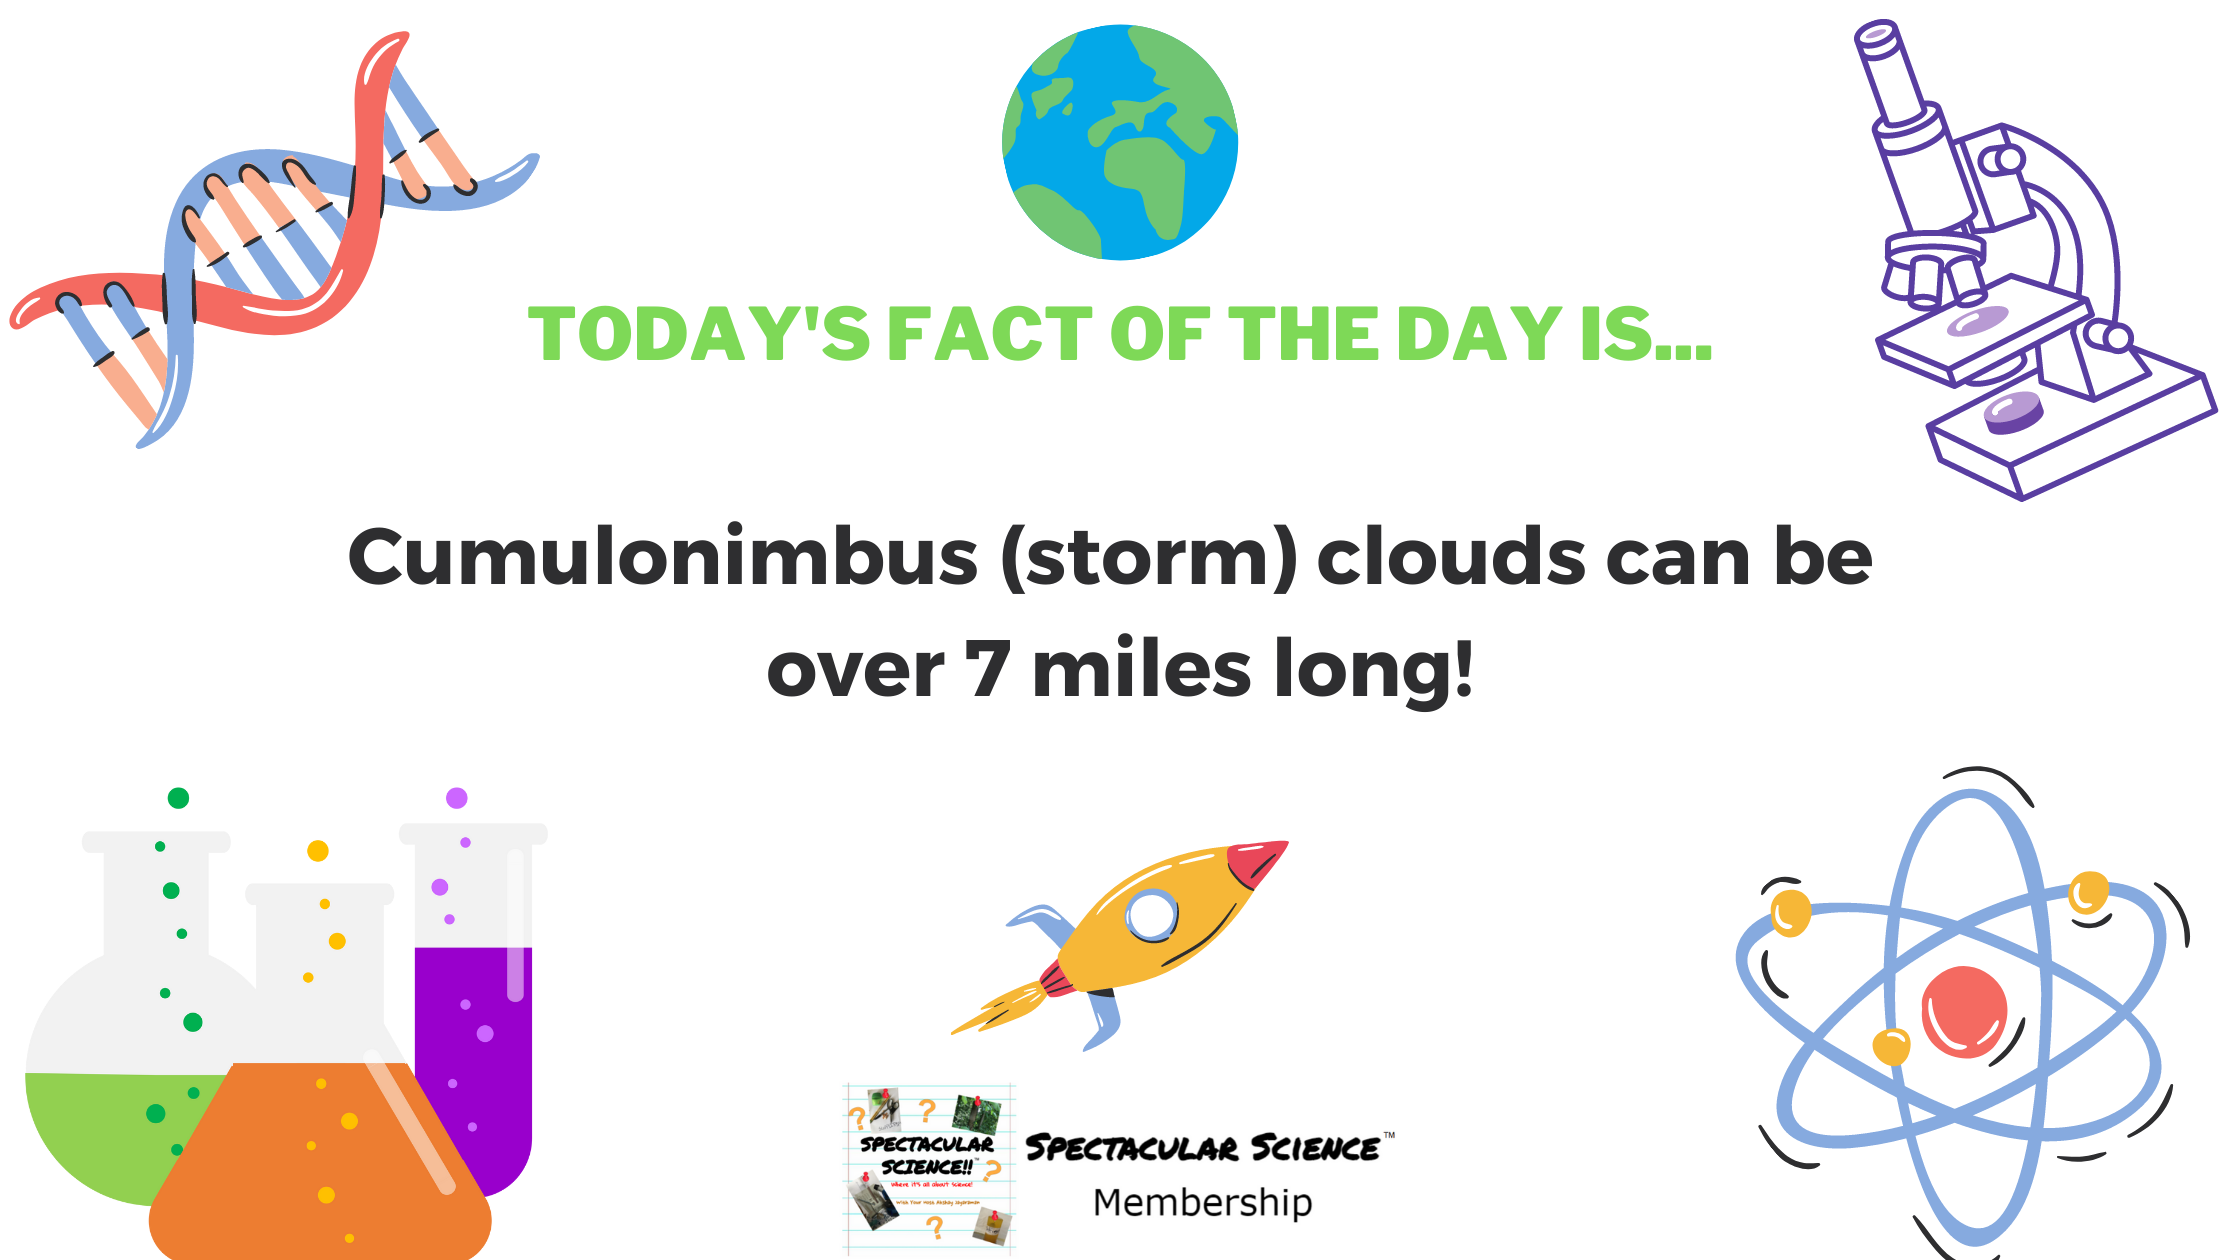 Fact of the Day Image Mar. 13th